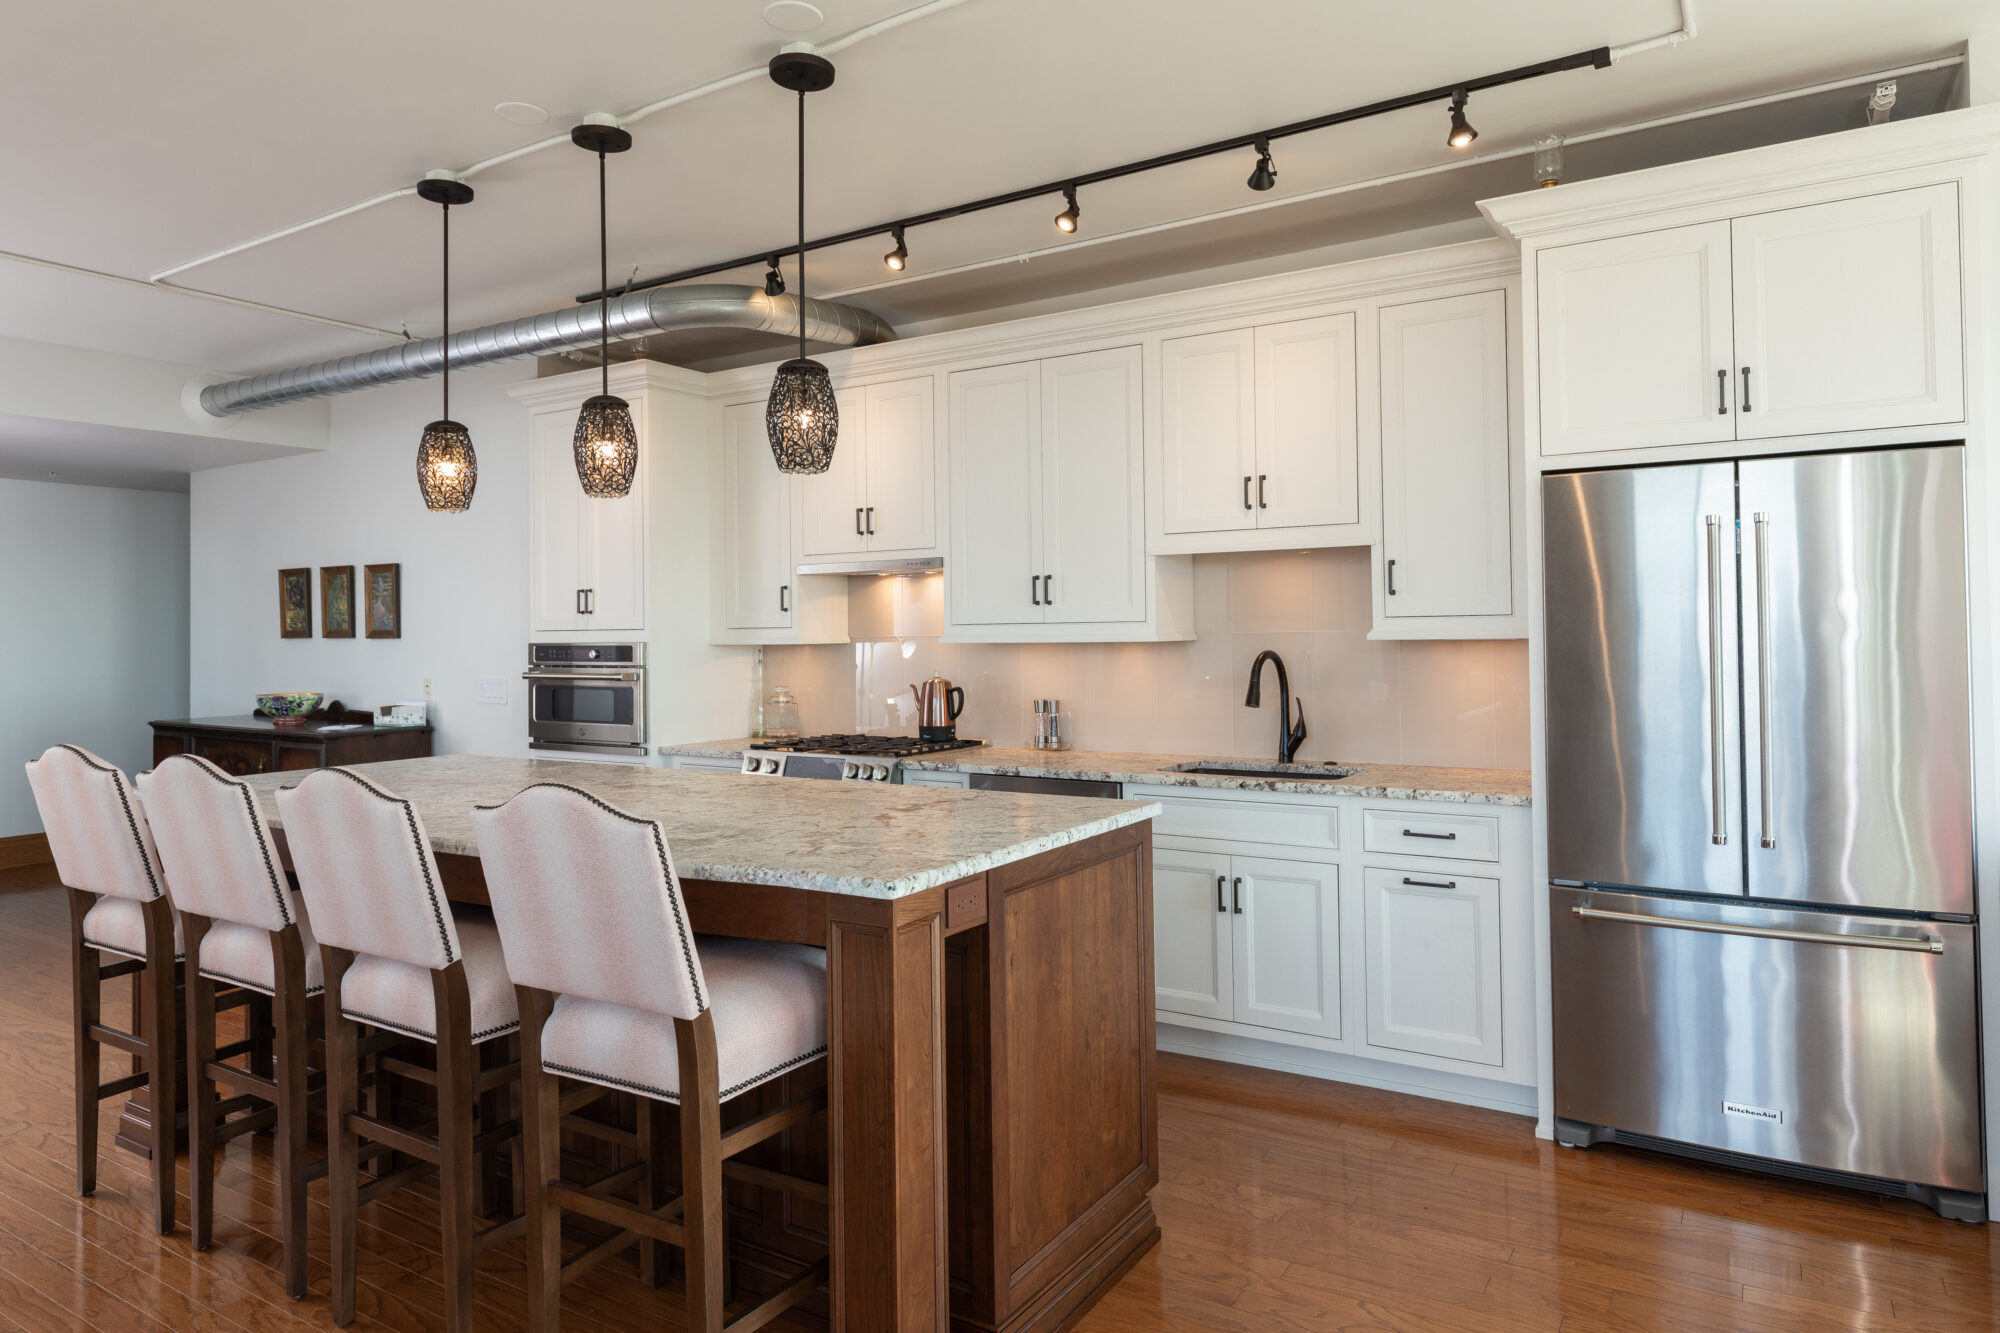 Newly renovated kitchen showcasing dark wooden flooring, island with barstool seats, and white custom cabinets